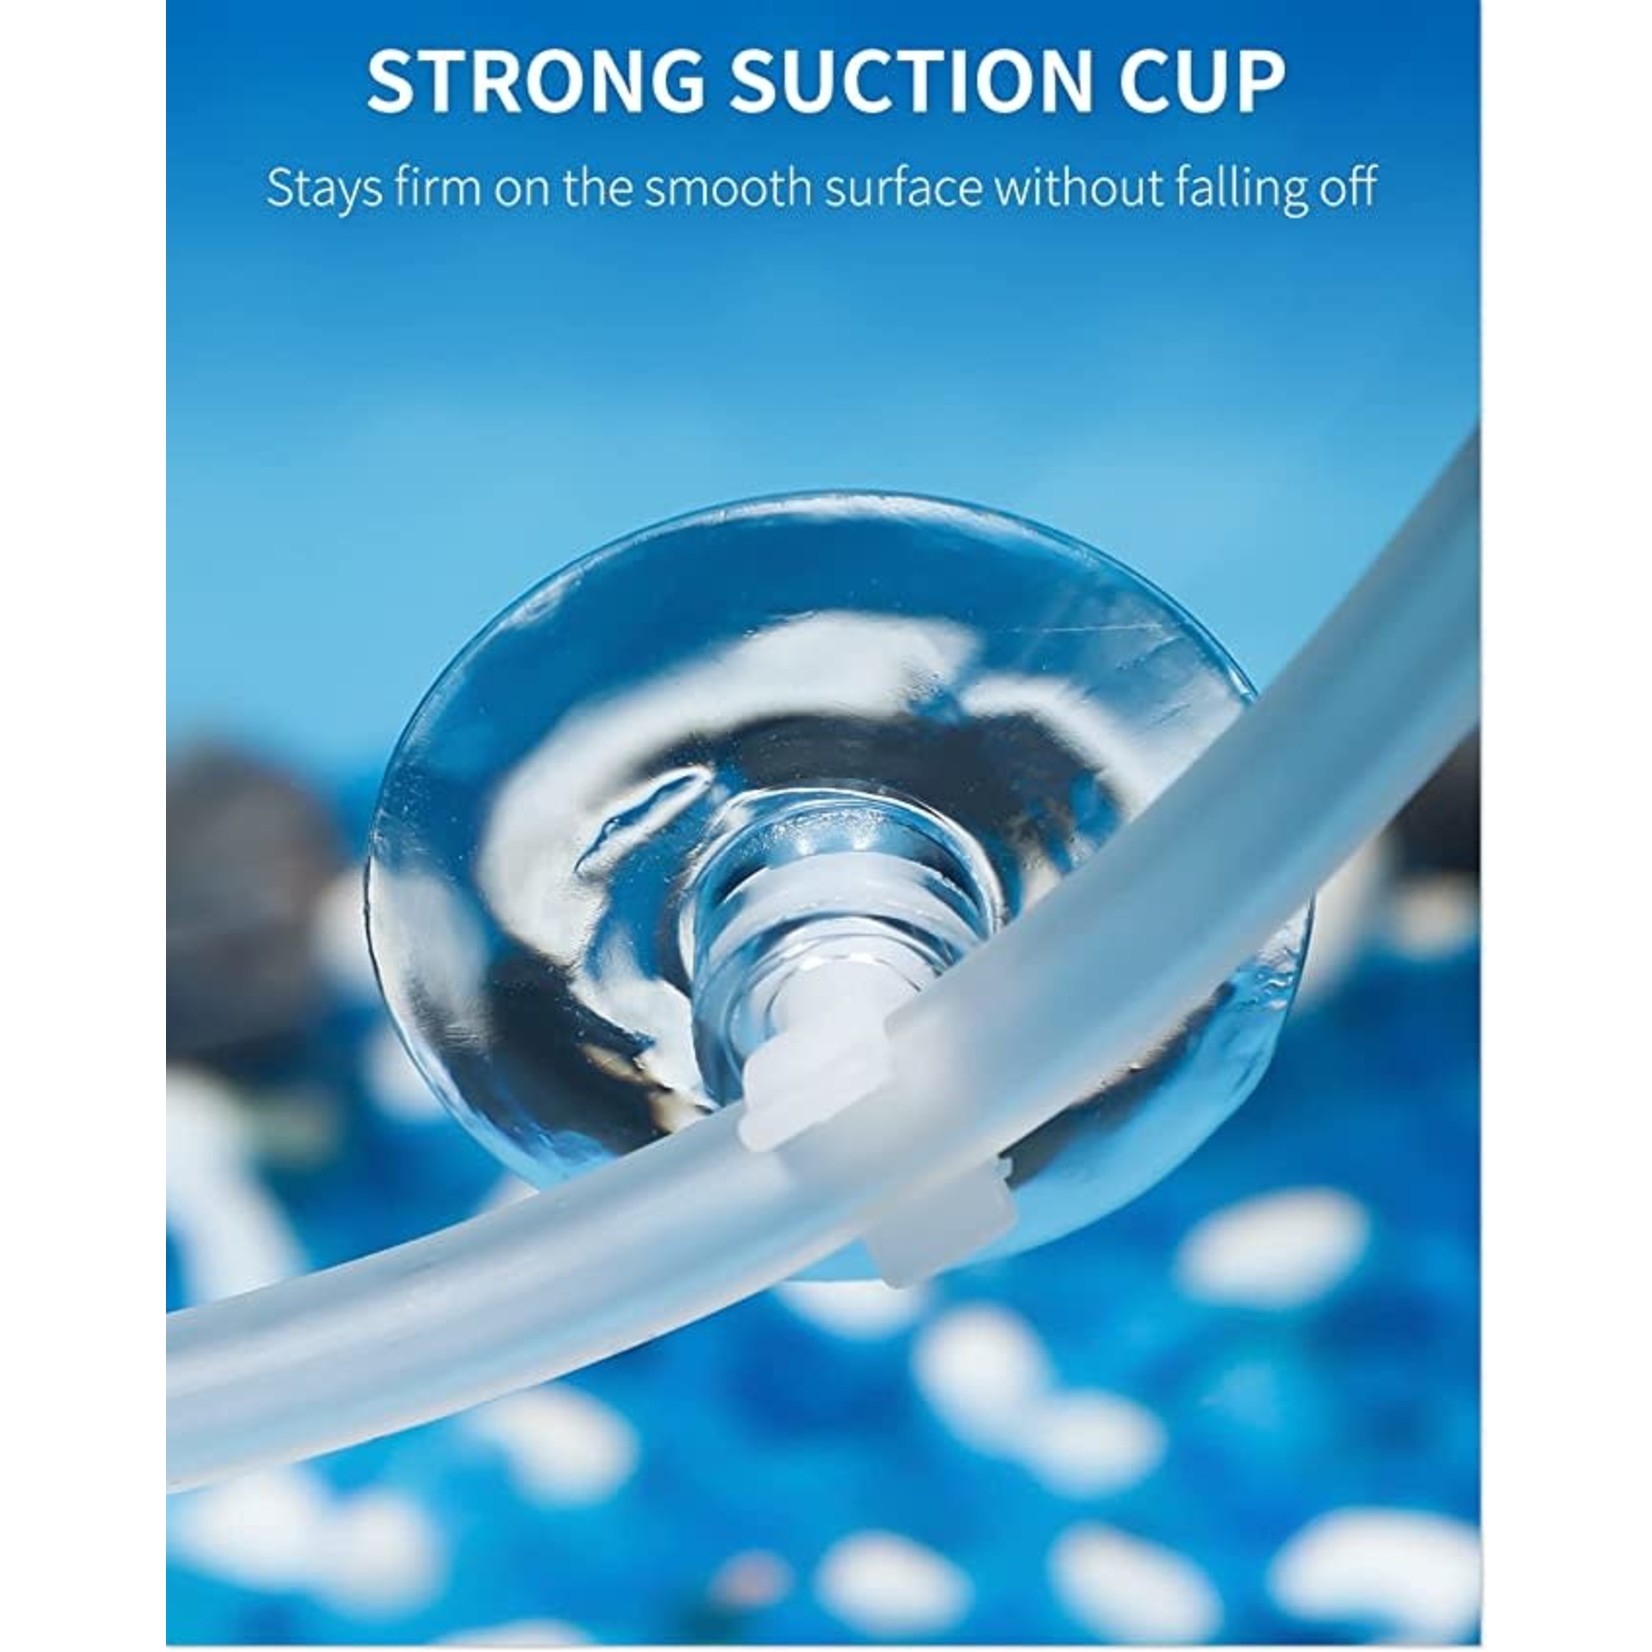 Airline Suction Cups - 2 Pack